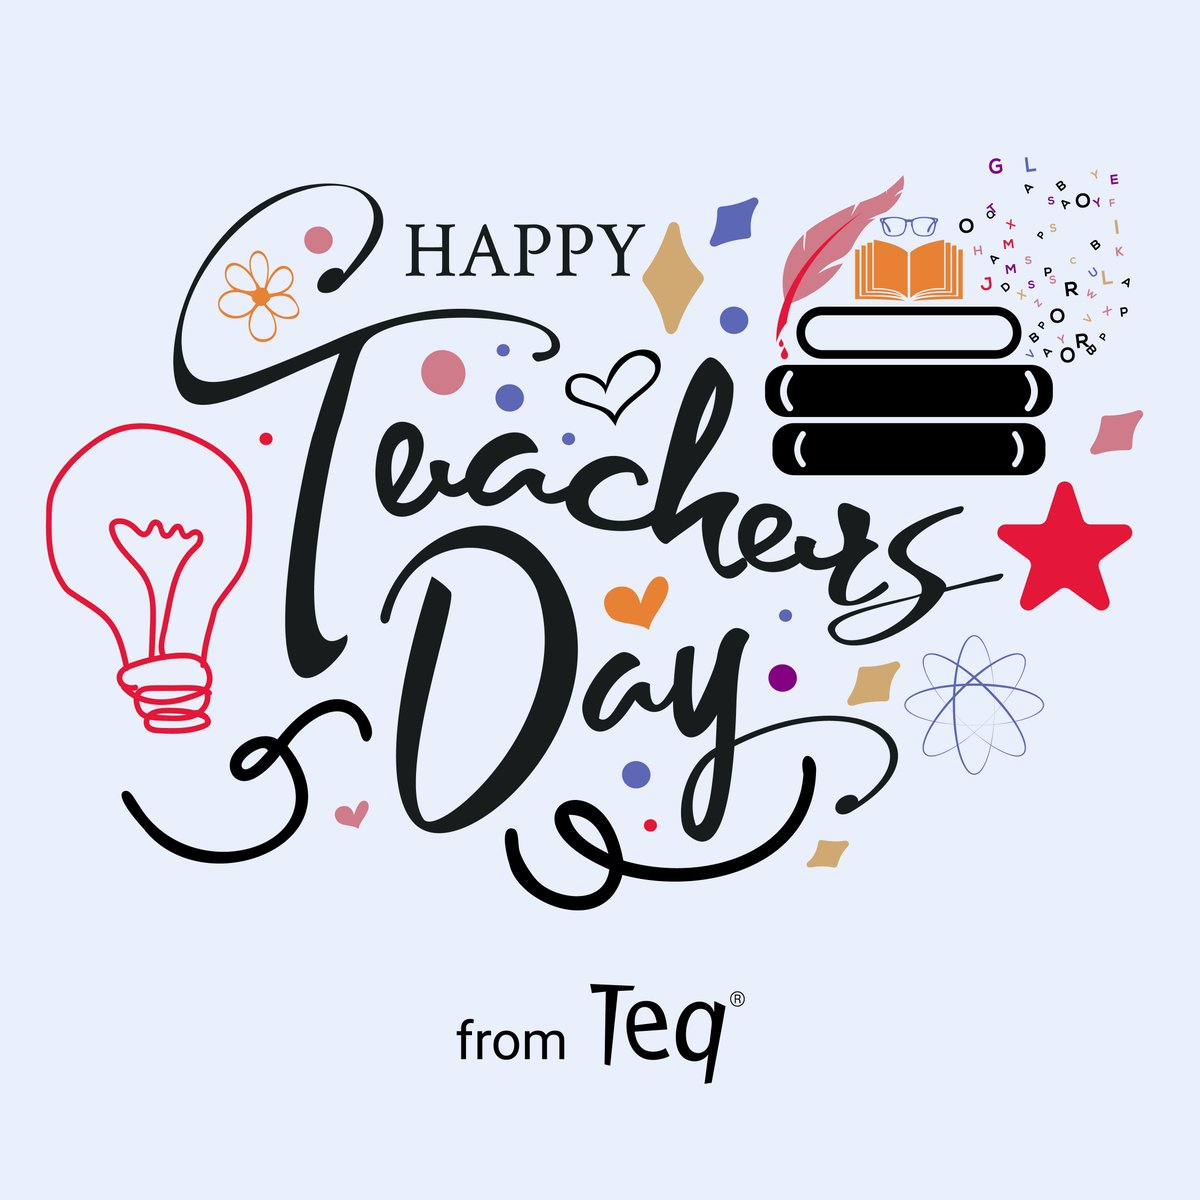 From all of us at OTIS, we would like to wish a happy #TeacherAppreciationDay to all of the educators who have made an impact on our lives! #edchat #educatorPD #TeacherAppreciationWeek 🍎📗🏫✏️🎓